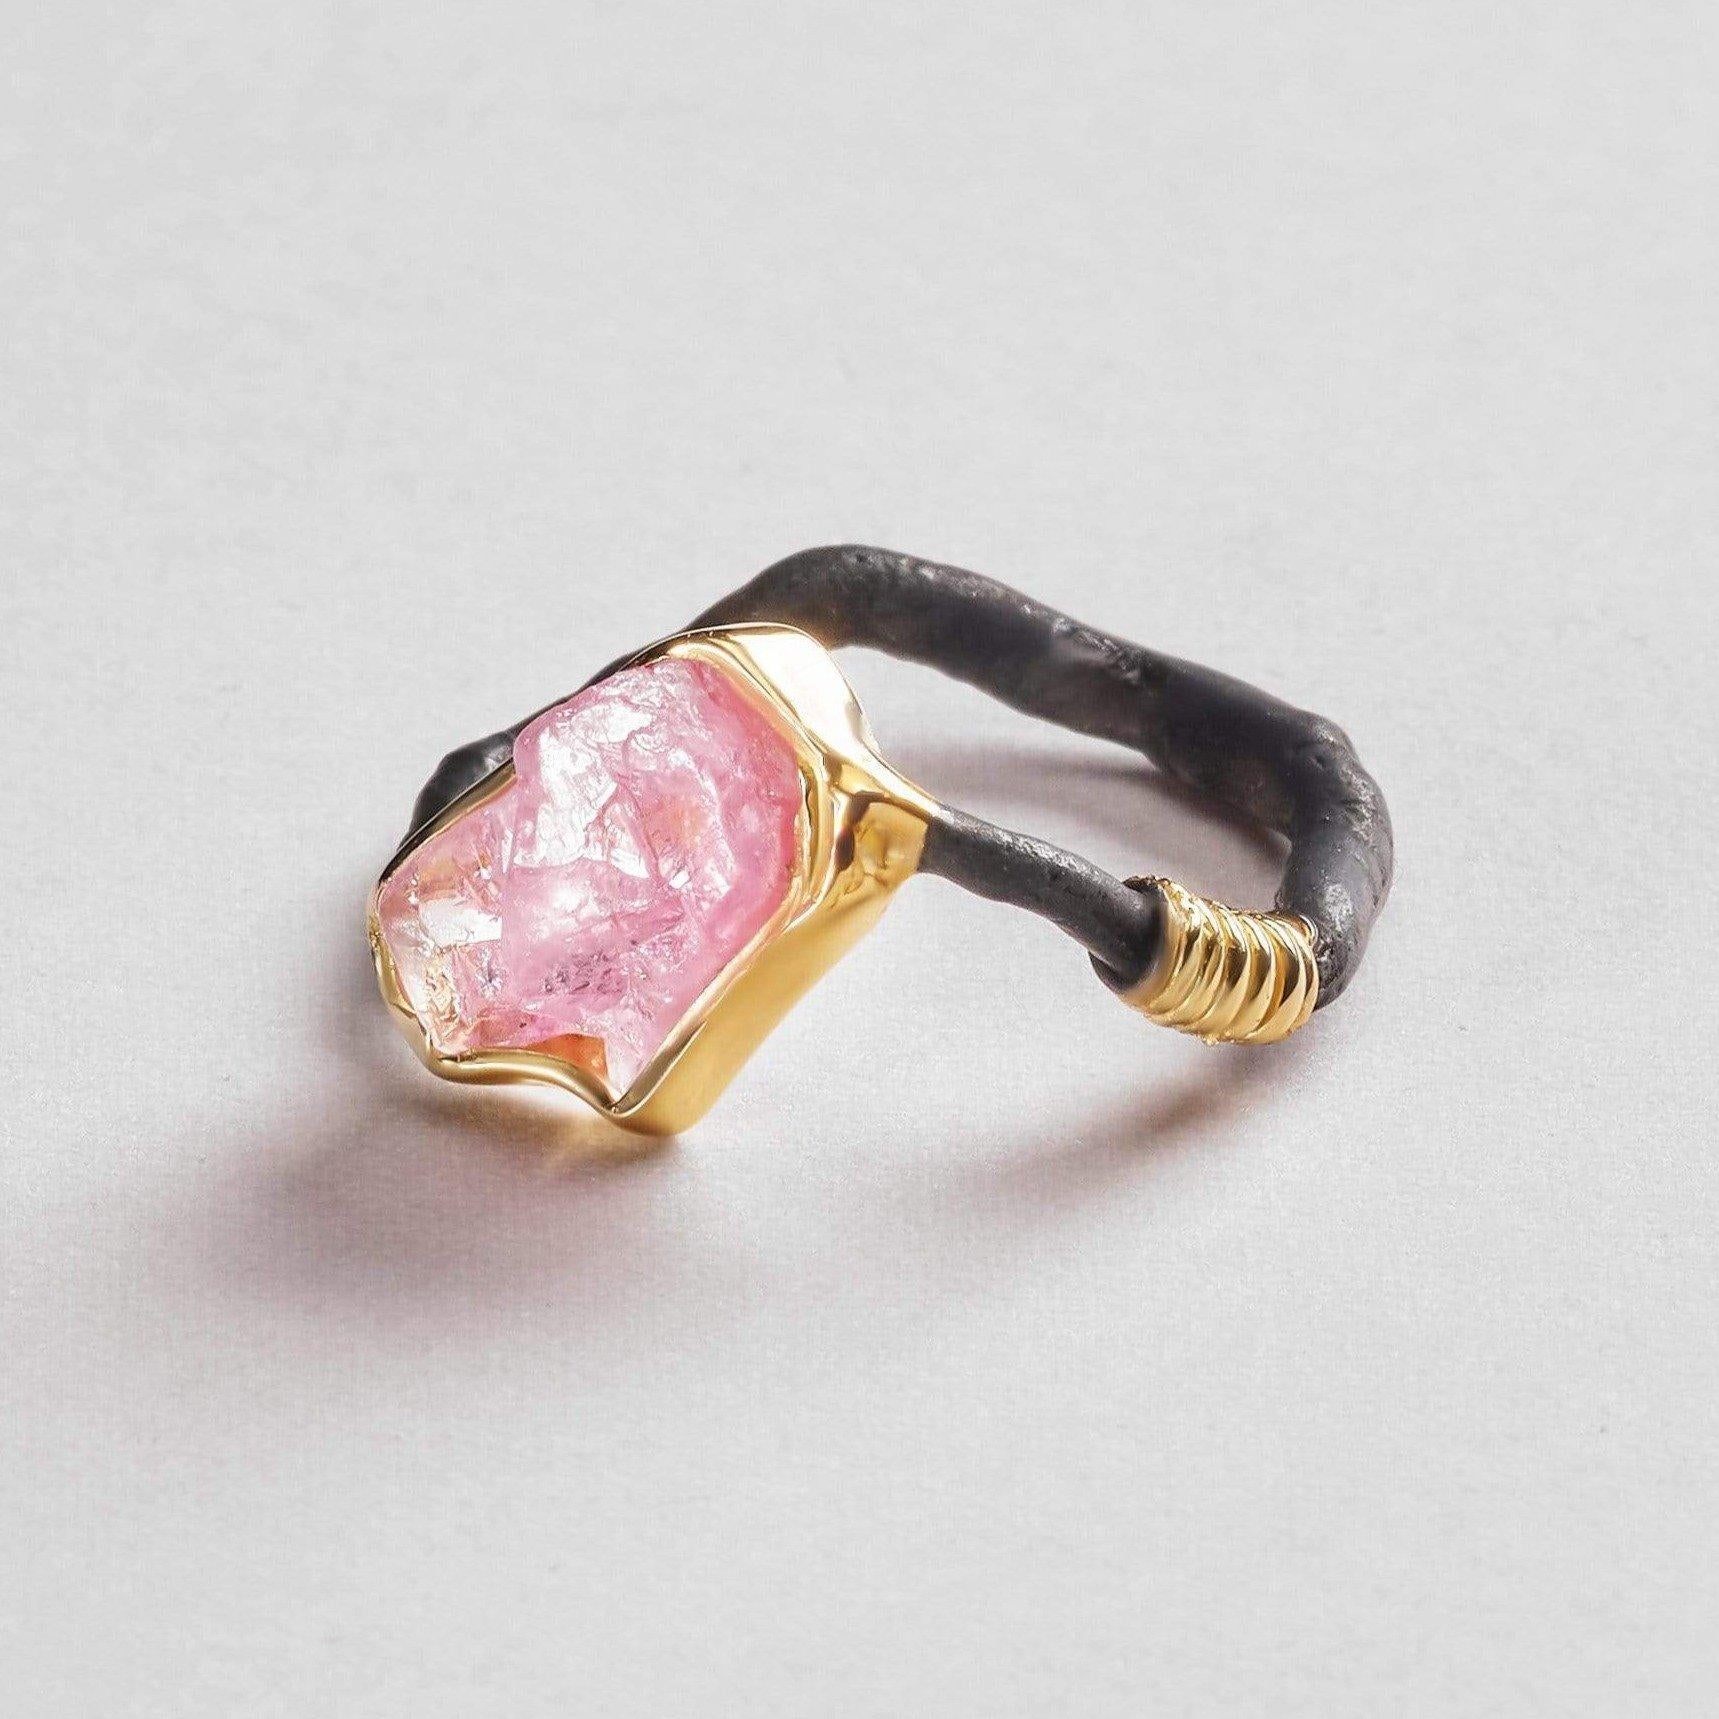 Rough Cut Handmade 925 Sterling Silver Lamia Spinel Ring with Gold and Black Anthracite For Sale